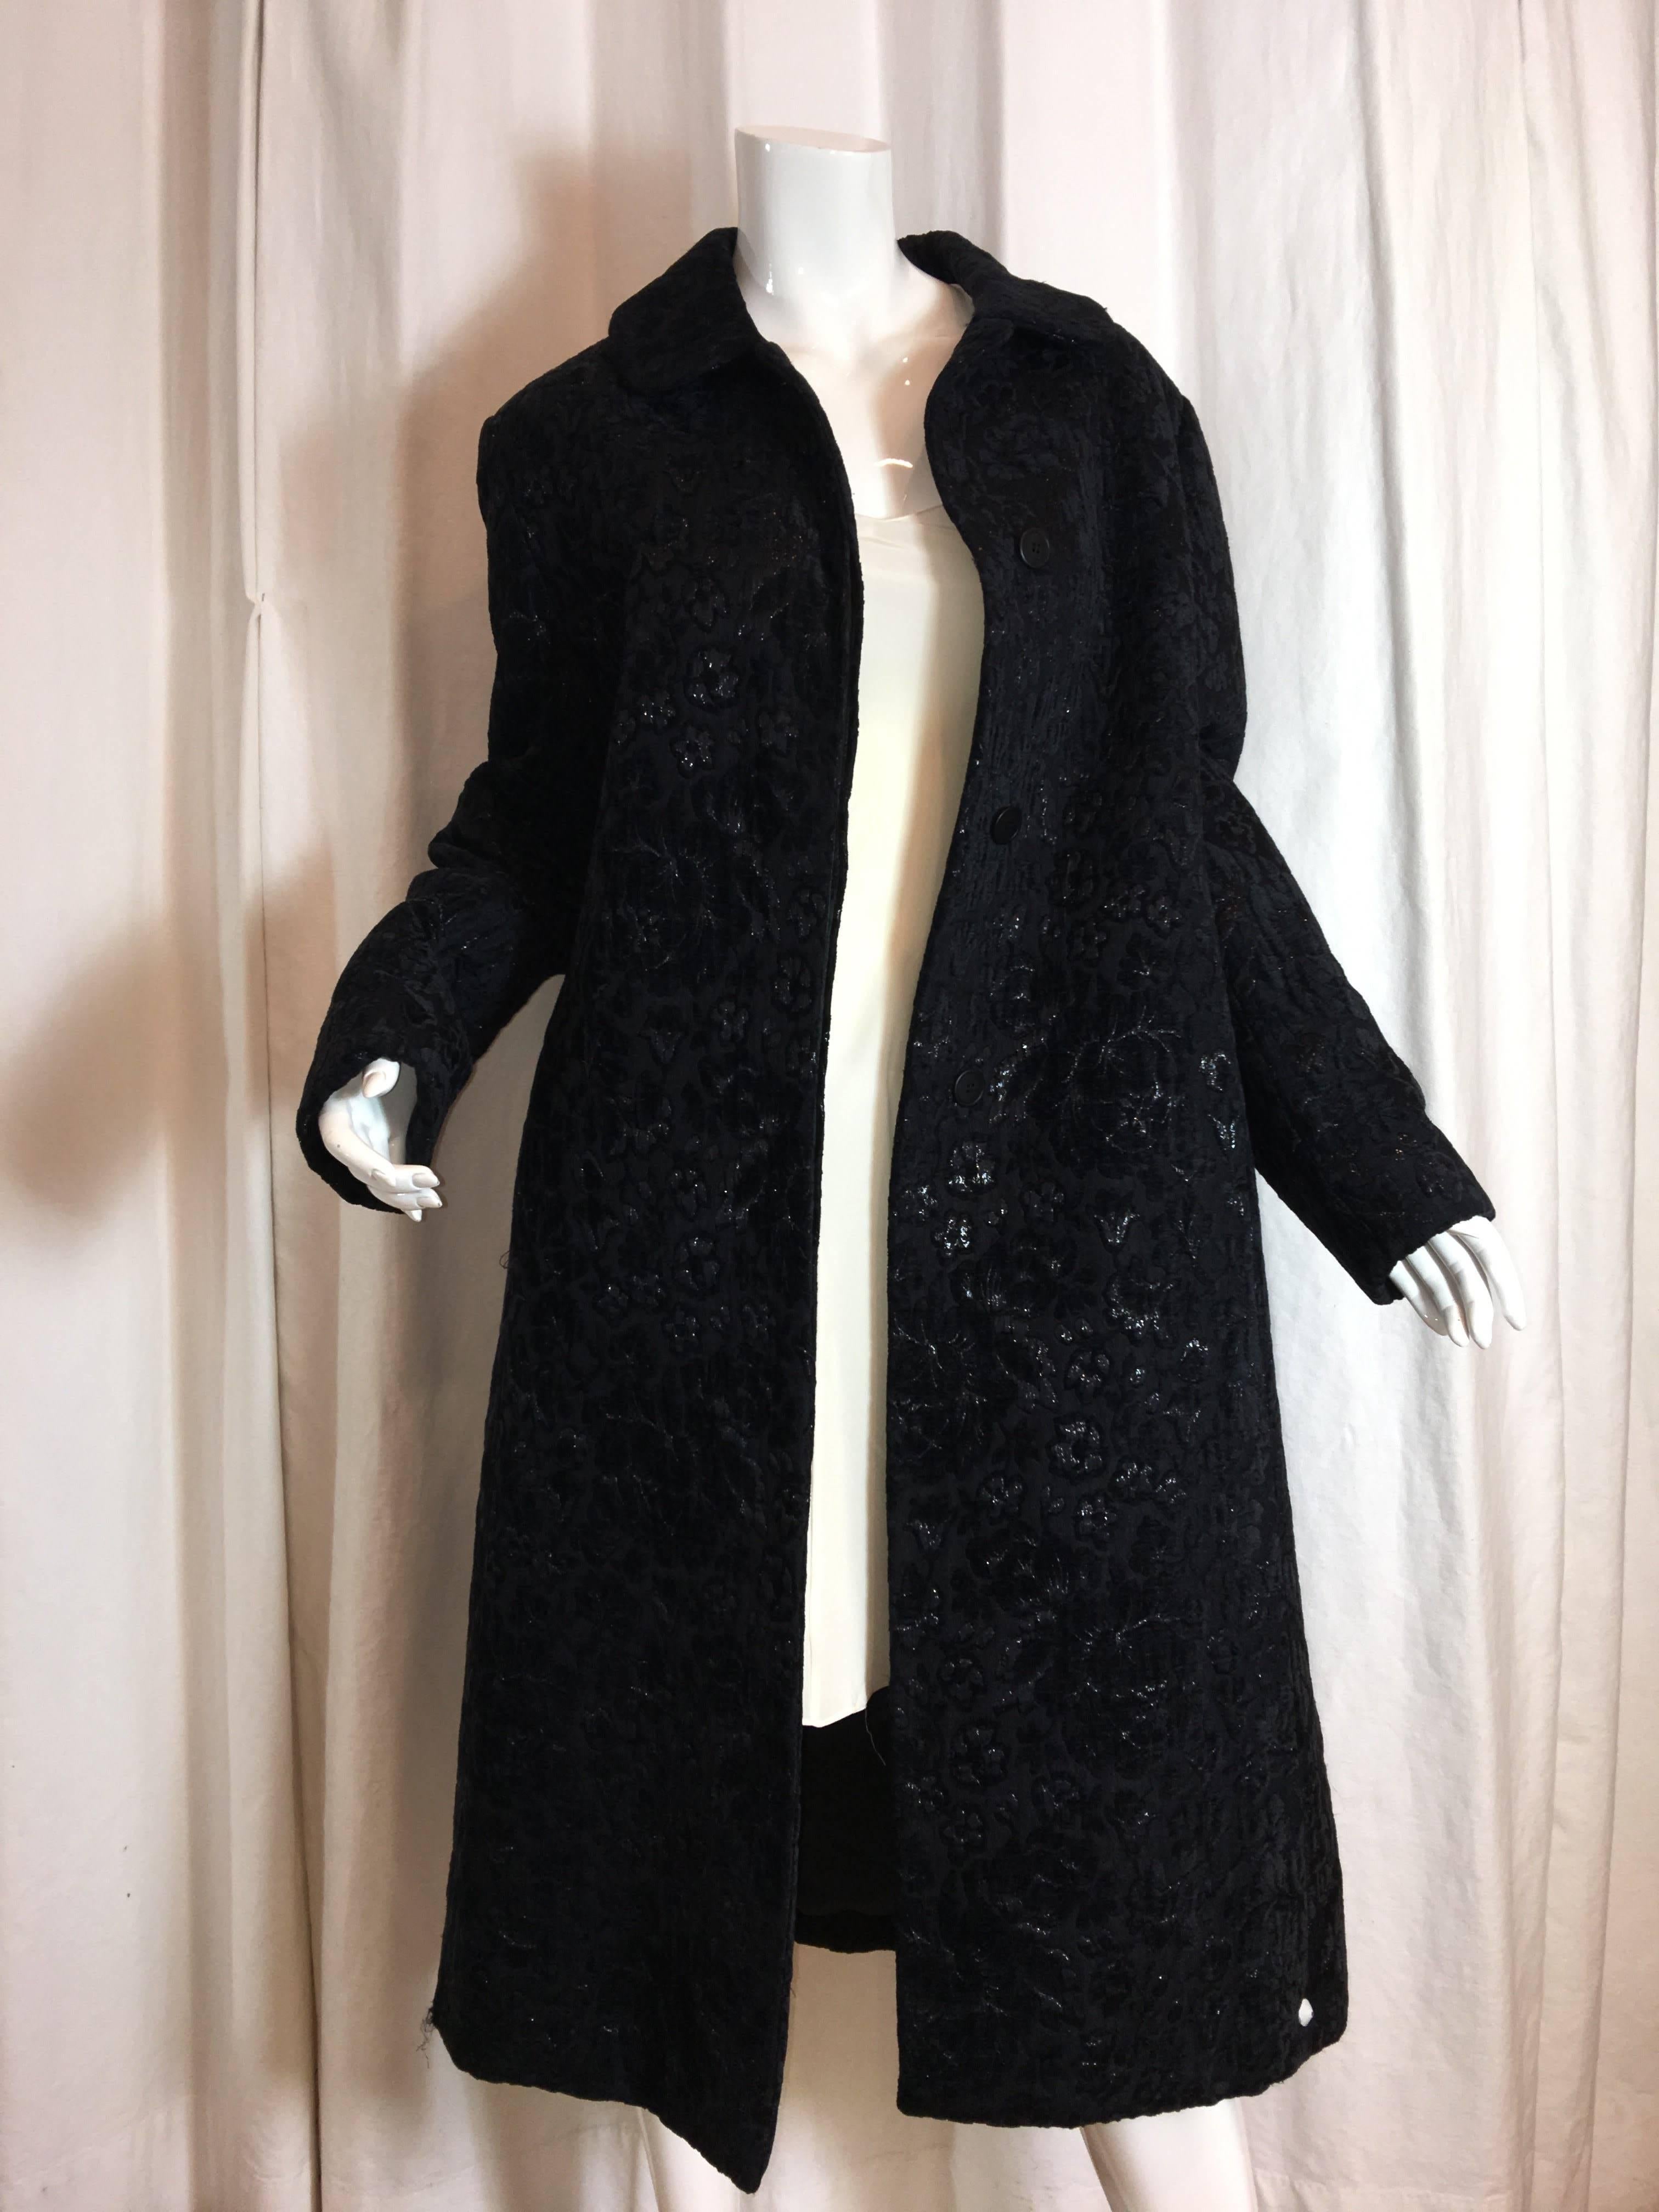 Cinzia Rocca Mid Calf Length Coat with Black Floral Pattern in Cupro.